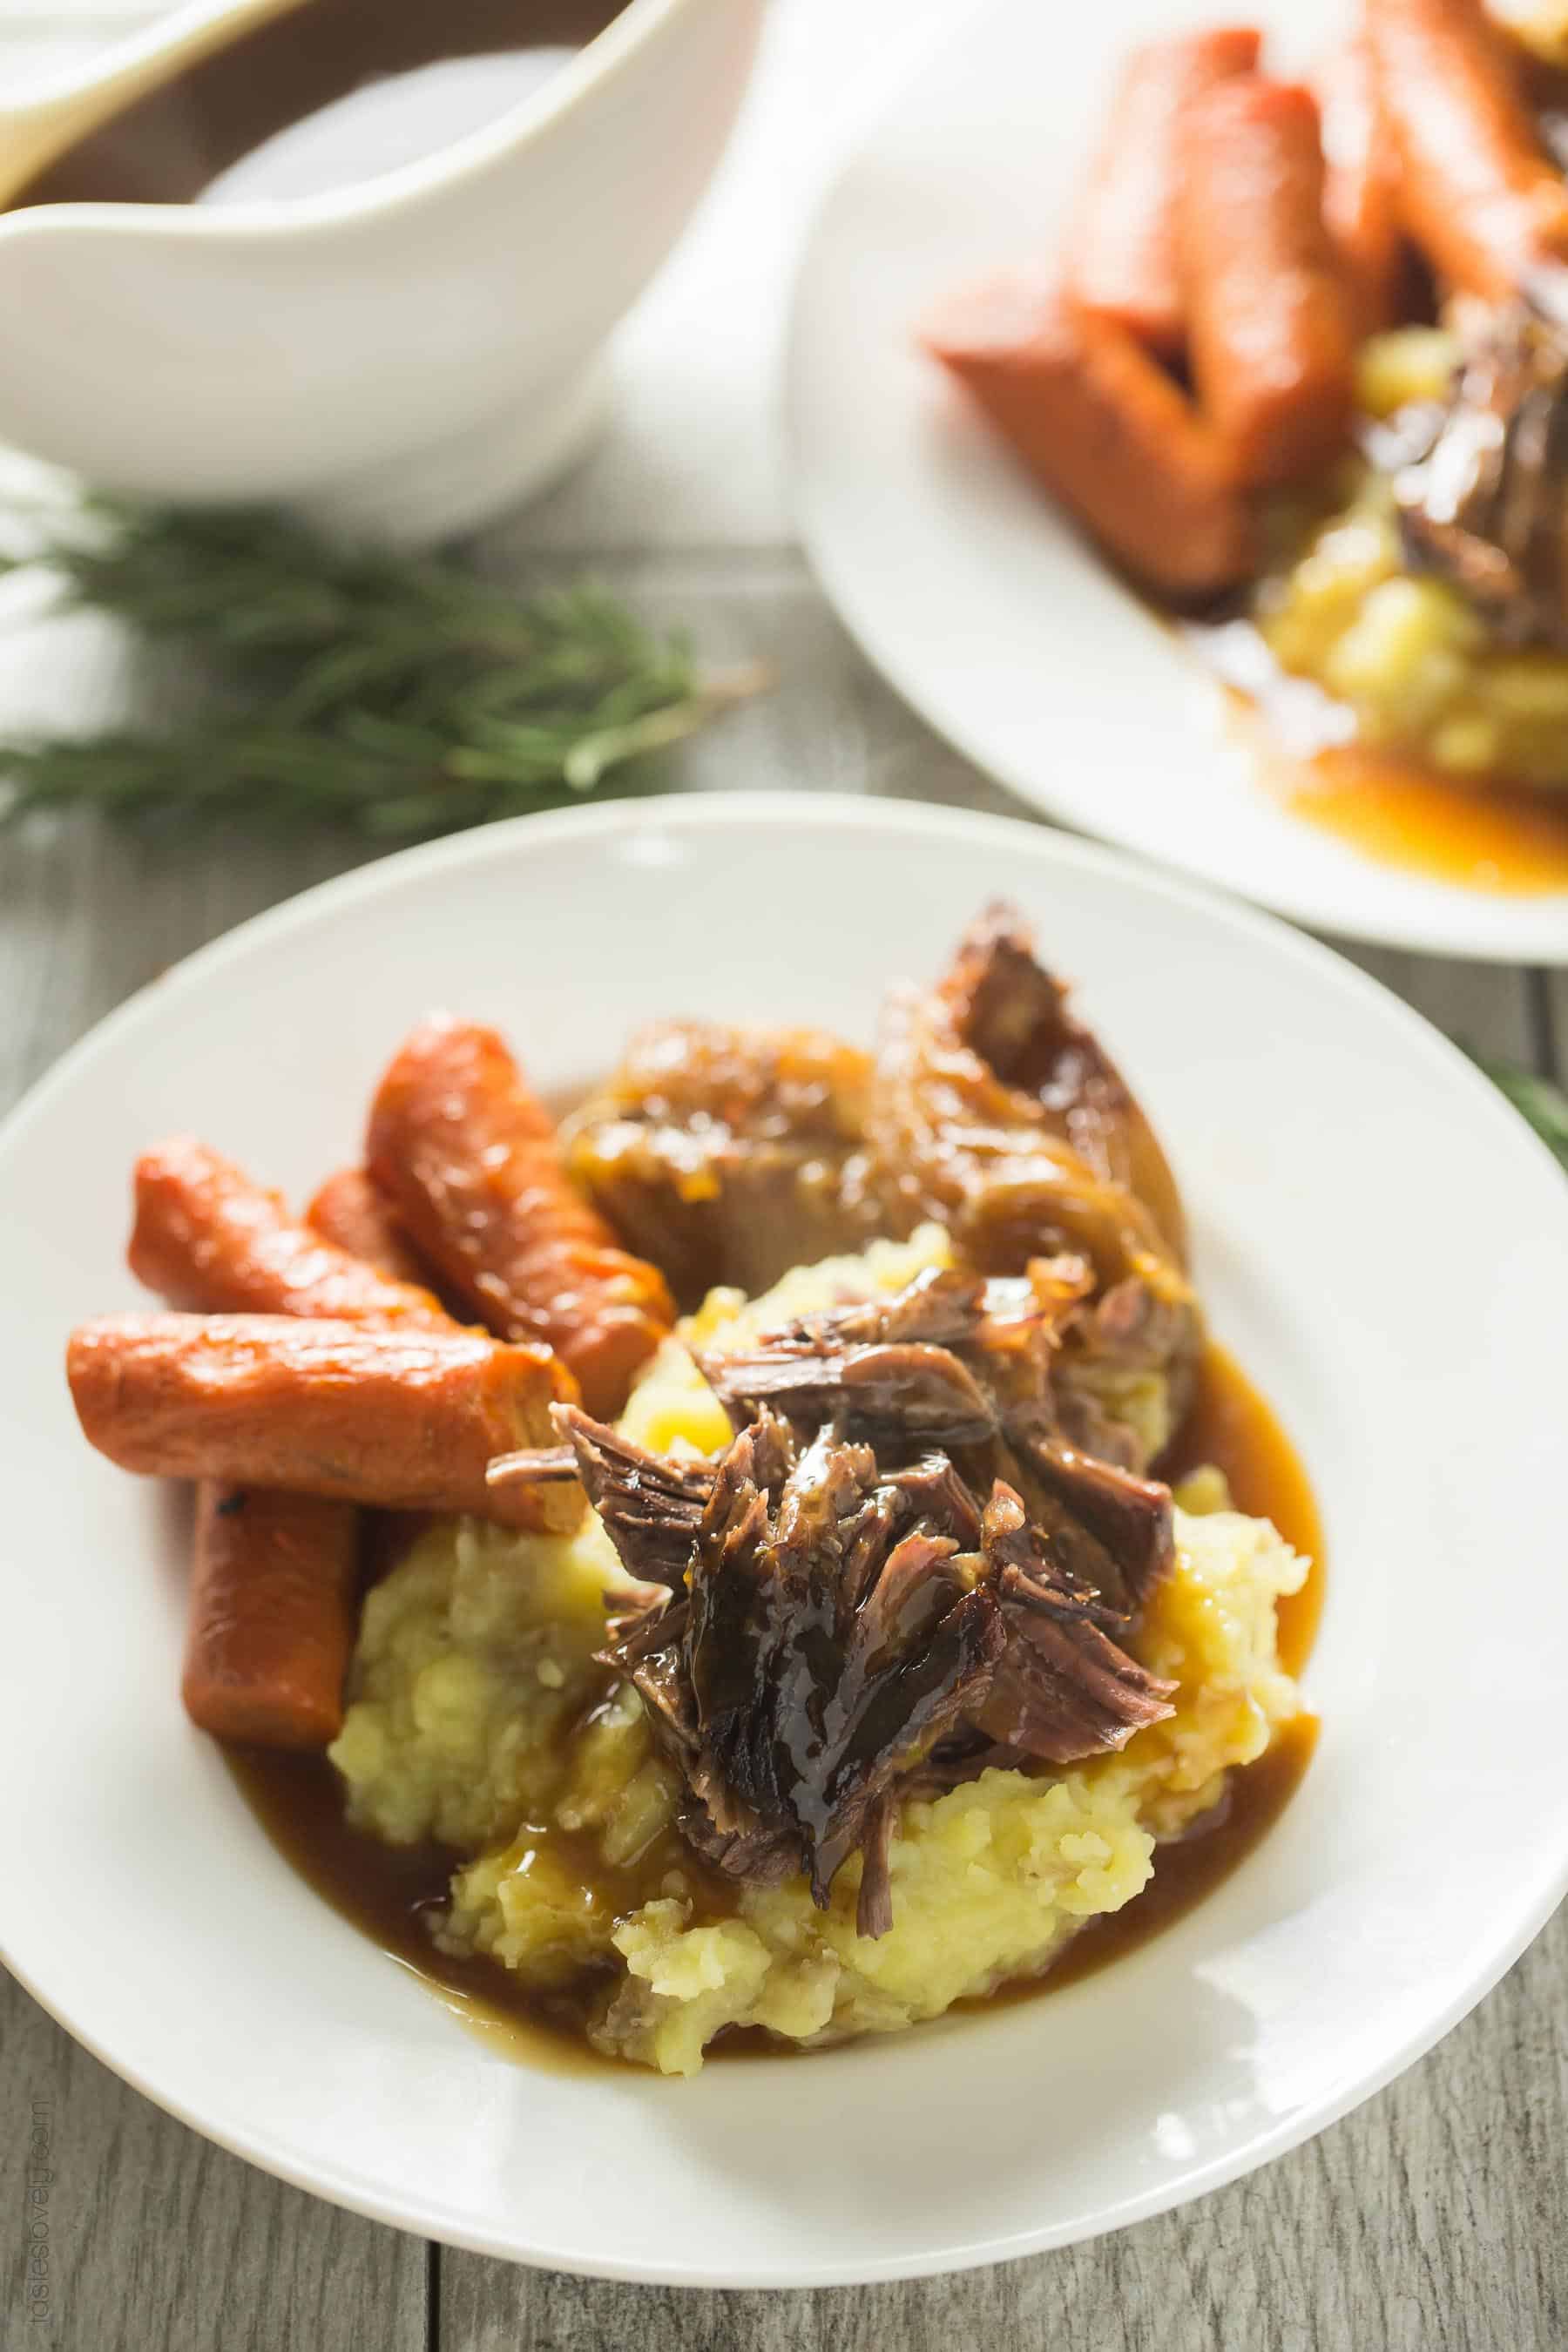 Paleo Pot Roast with Gravy - the most flavorful and juicy pot roast slow roasted in the oven. You would never guess it is dairy free, flour free, gluten free, and Whole30!